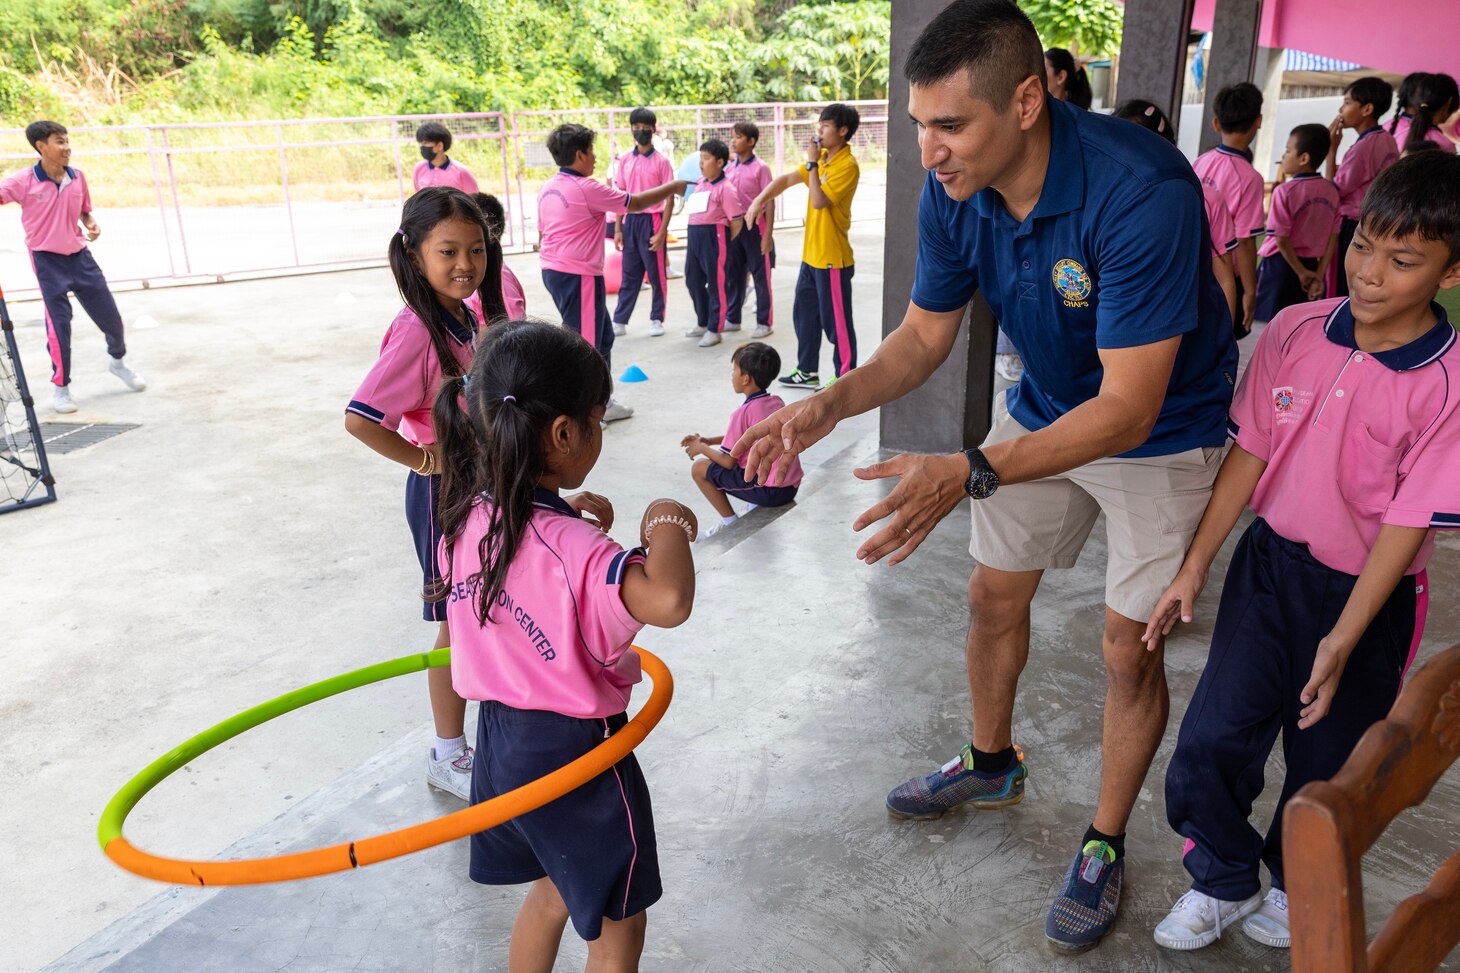 Navy Lt. Jamil A. Khan, right, chaplain, MSC Far East in Singapore, interacts with a child during a community relations event at the Learning Center of the Human Help Network in Pattaya, Thailand, Dec. 4. (Photo by Grady T. Fontana)